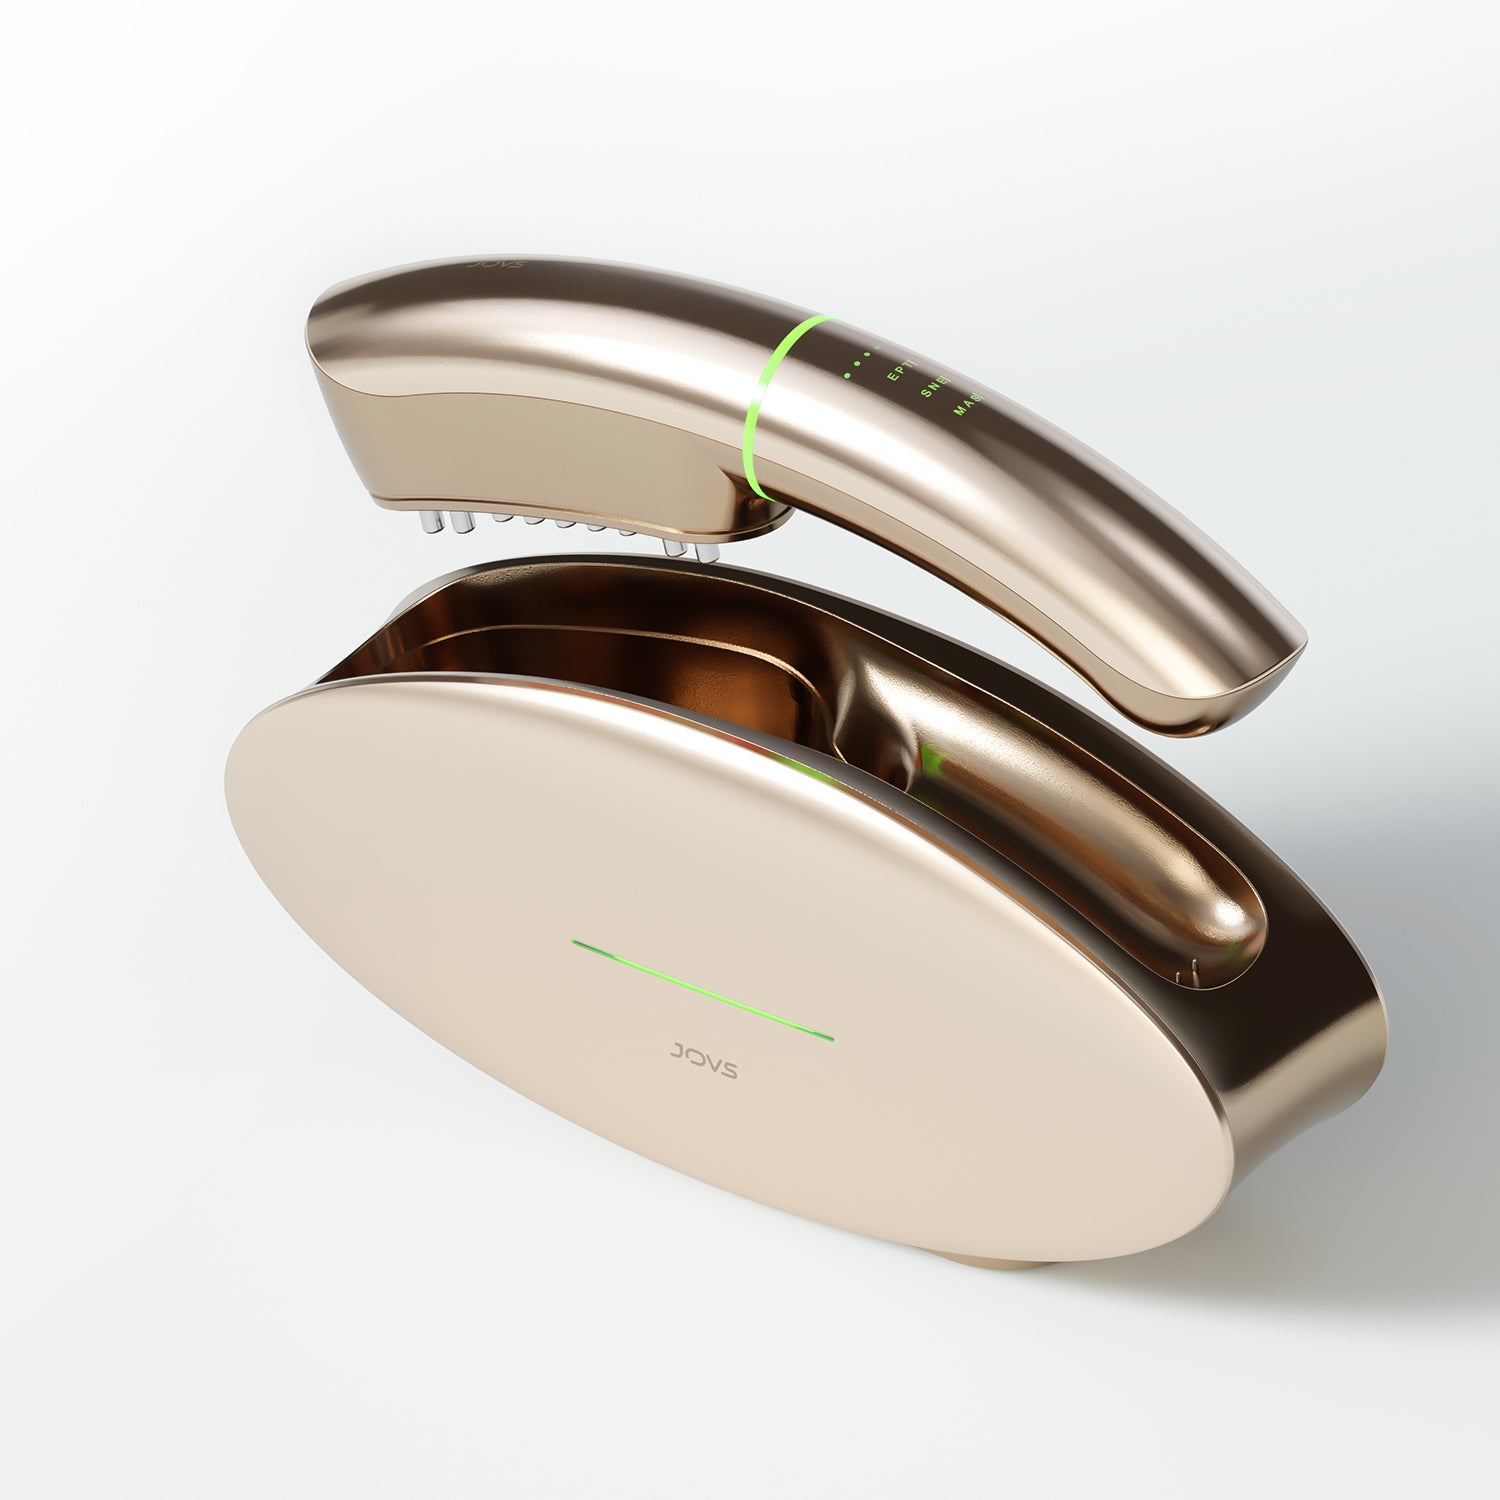 JOVS Slimax Microcurrent Full-body Anti-aging Device in a sleek design for full-body rejuvenation and care.